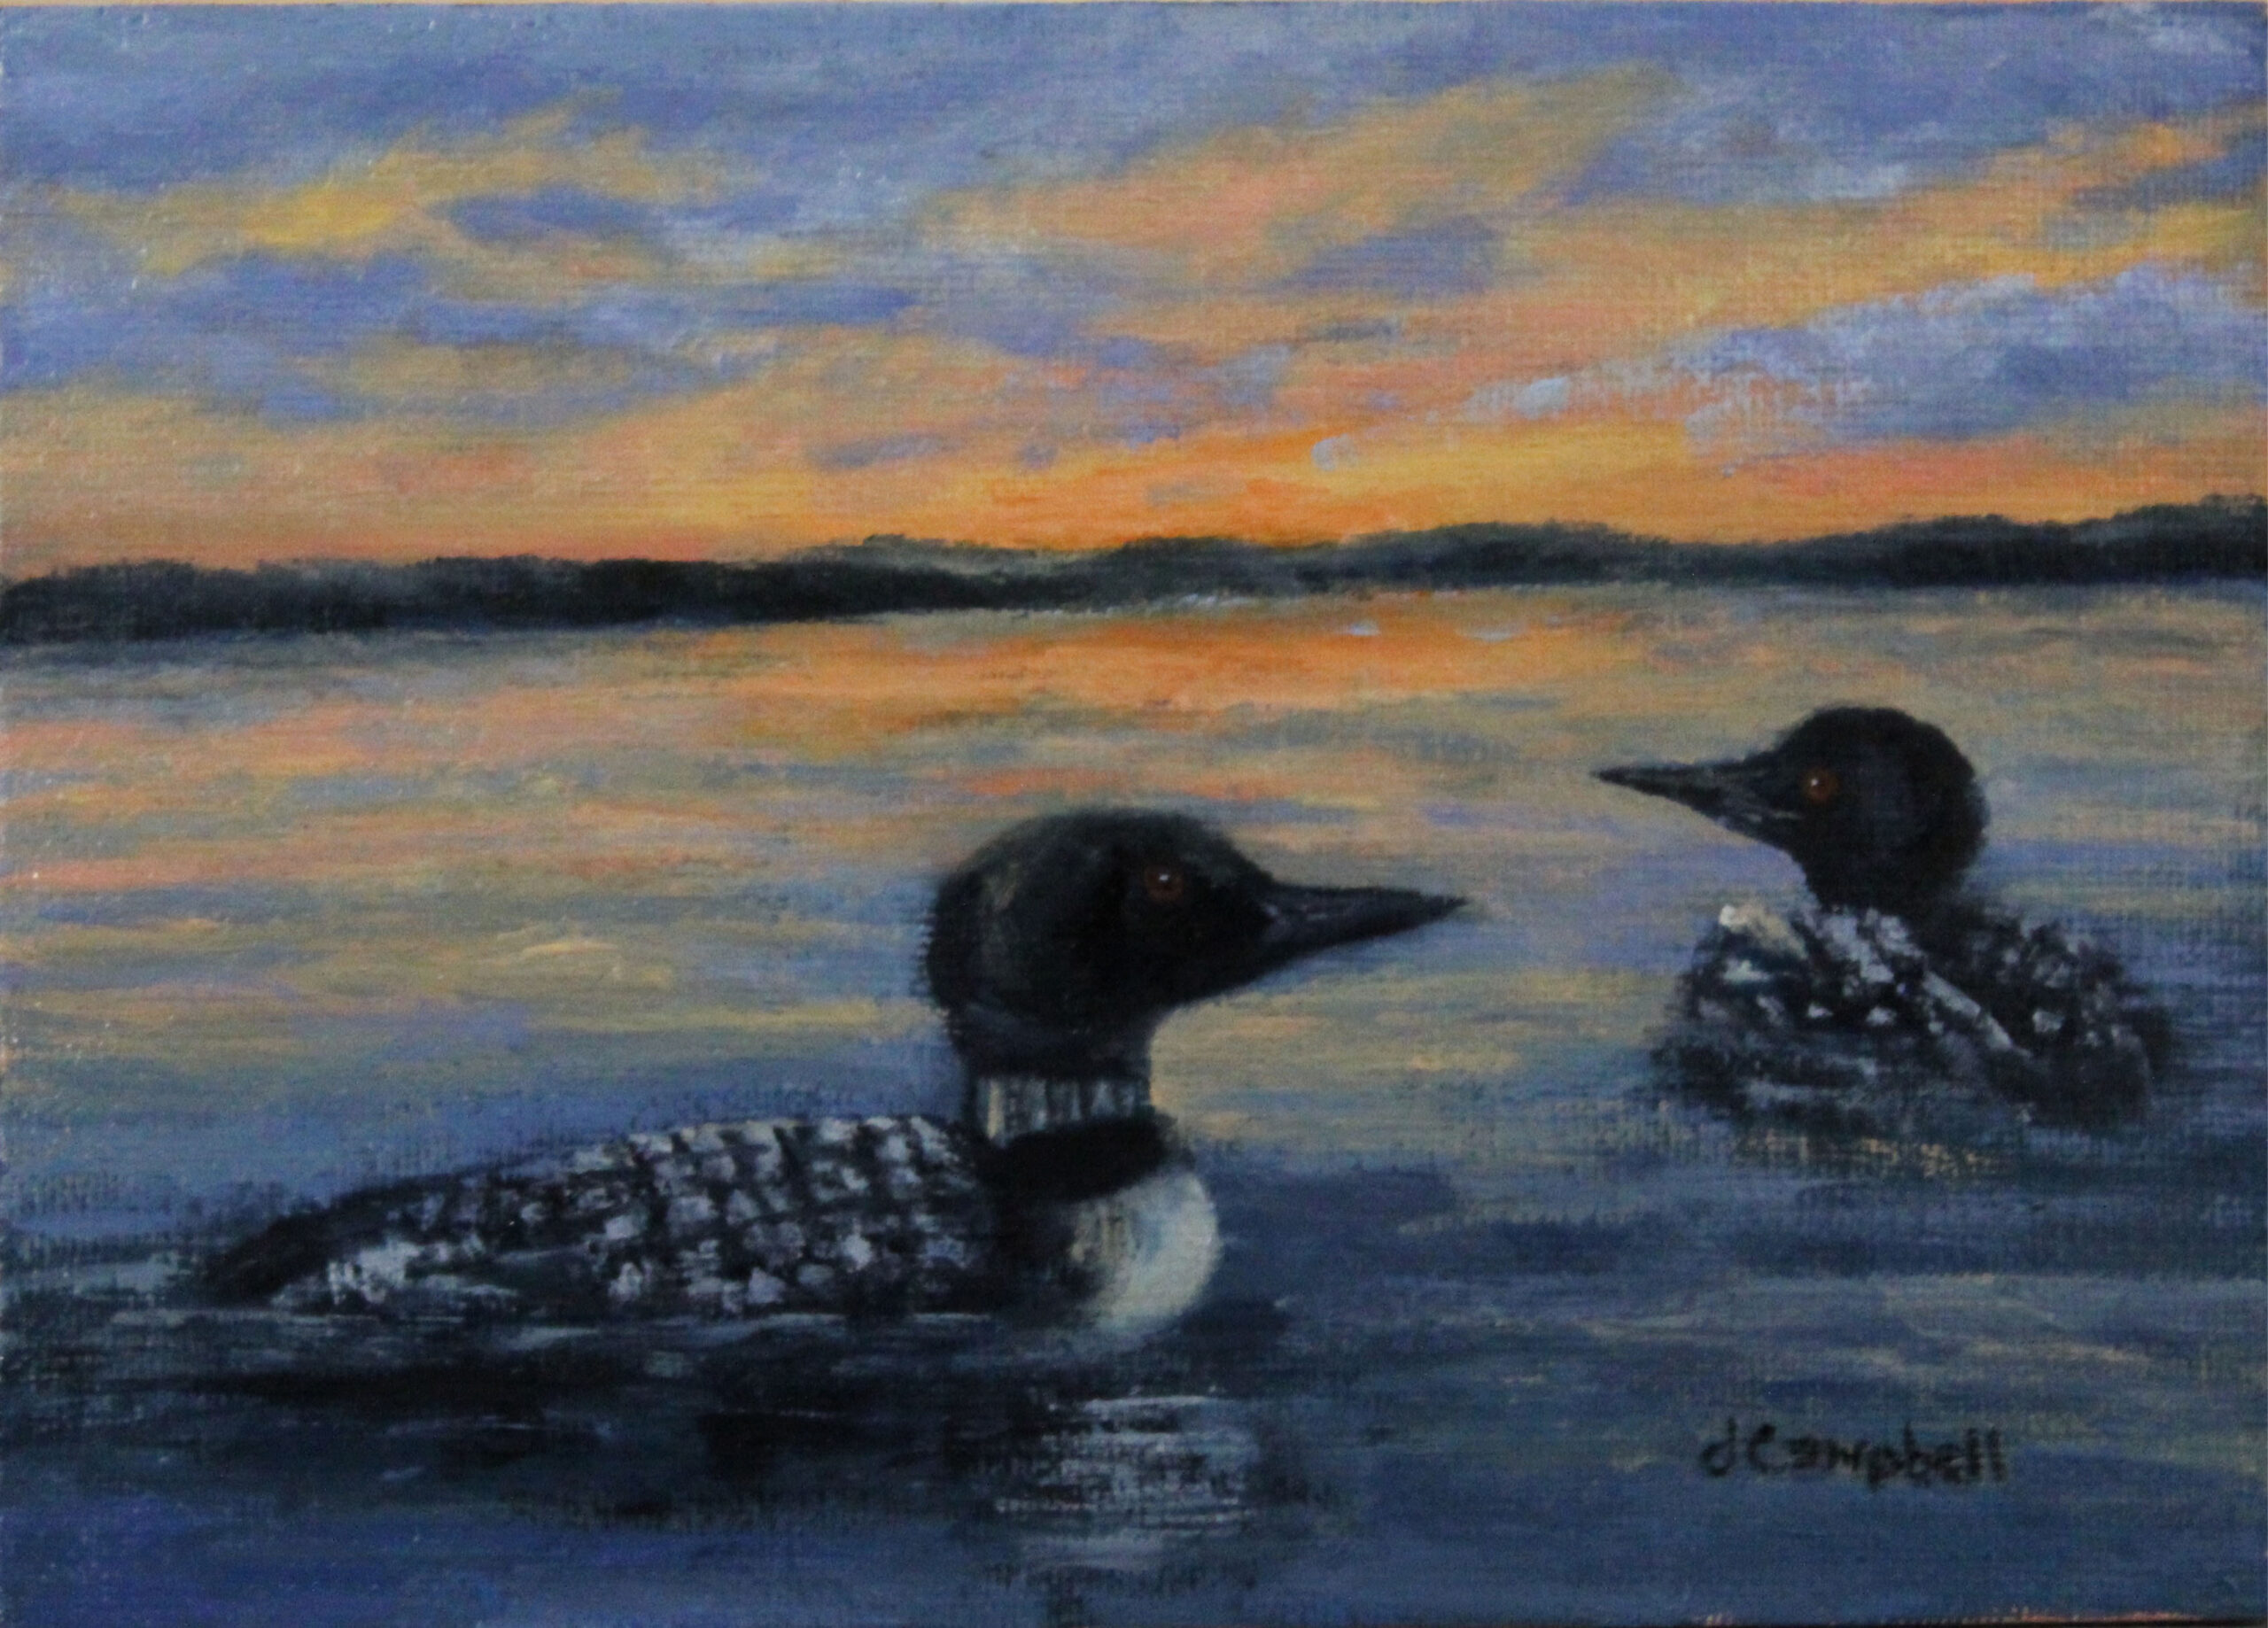 Two Loons at sunset